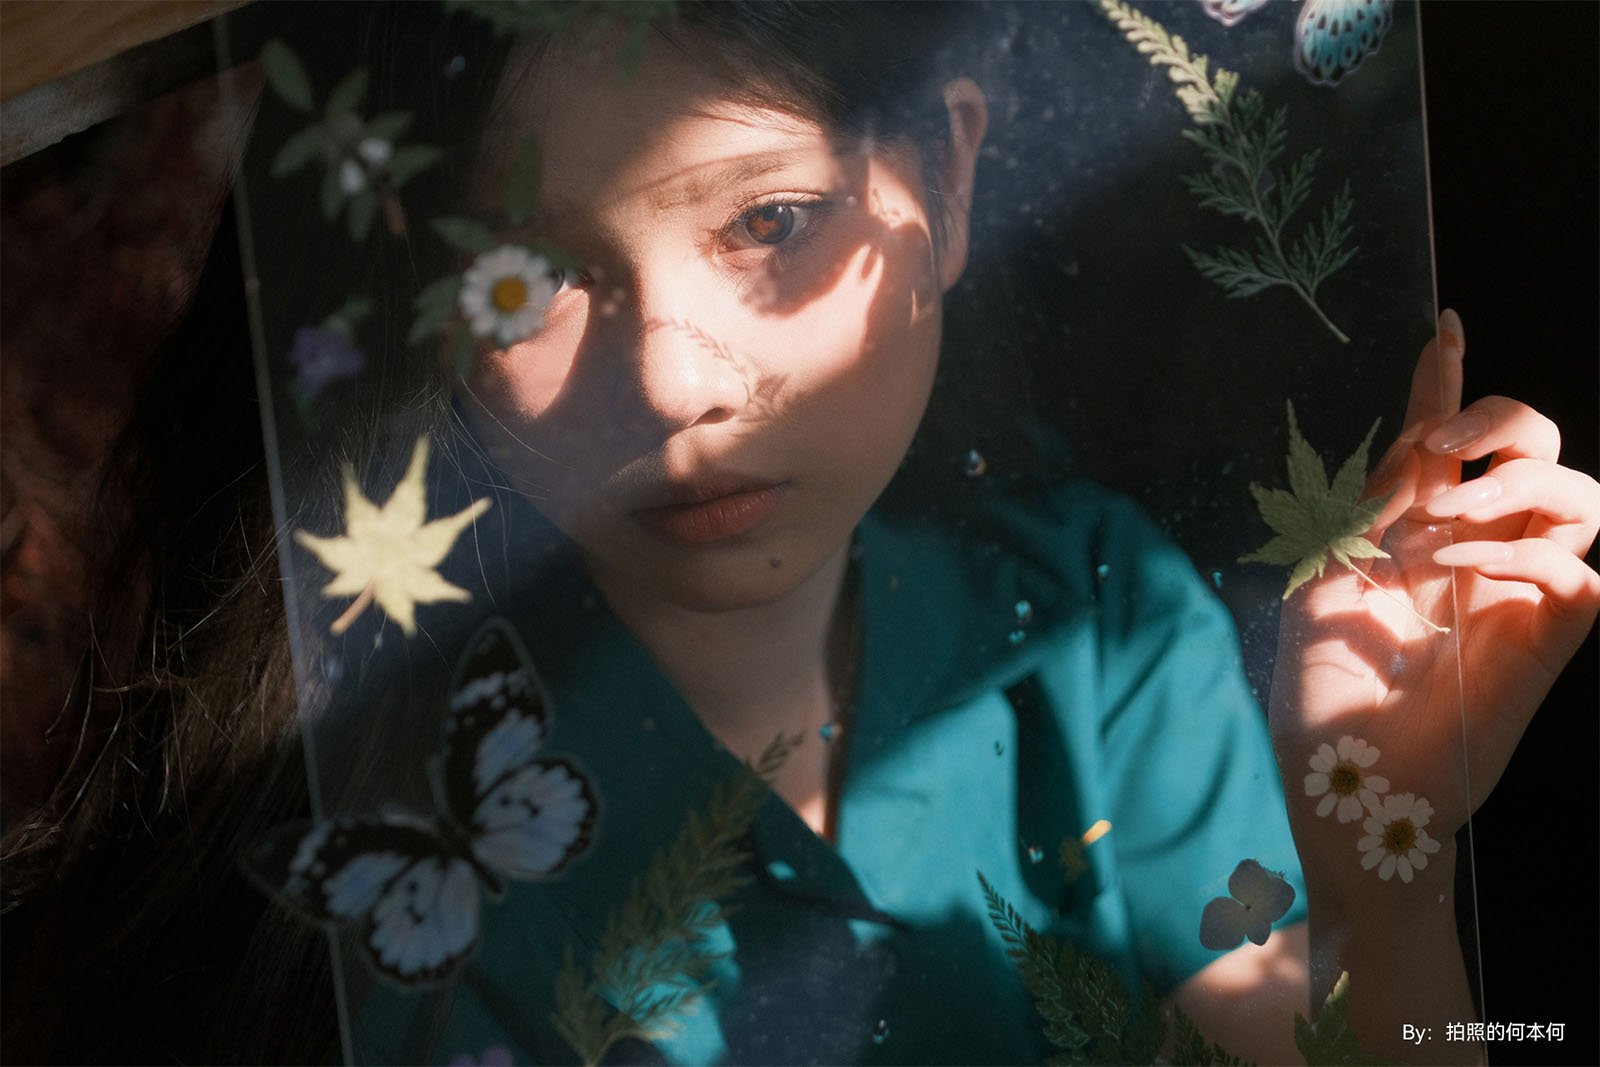 A young woman in a teal blouse, viewed through a glass pane adorned with illustrations of butterflies and flowers, illuminated by a shaft of sunlight.